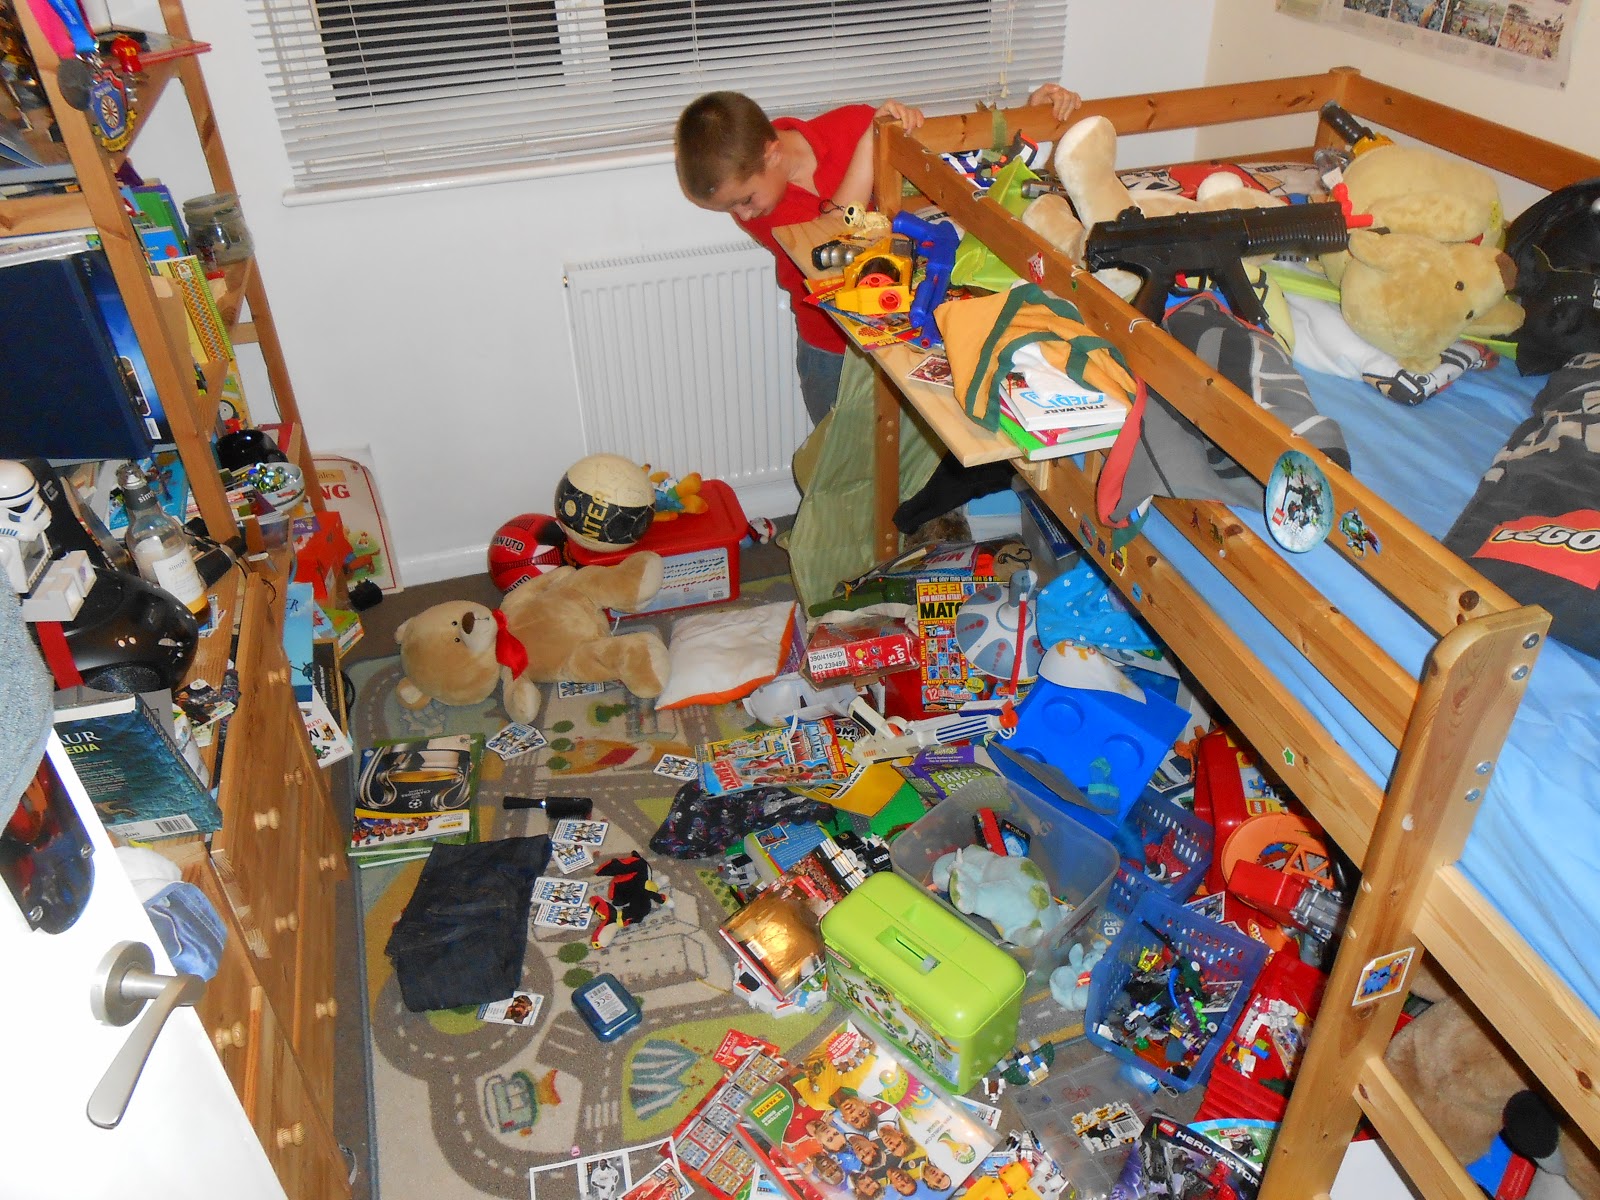 bunk beds and toys all over the floor